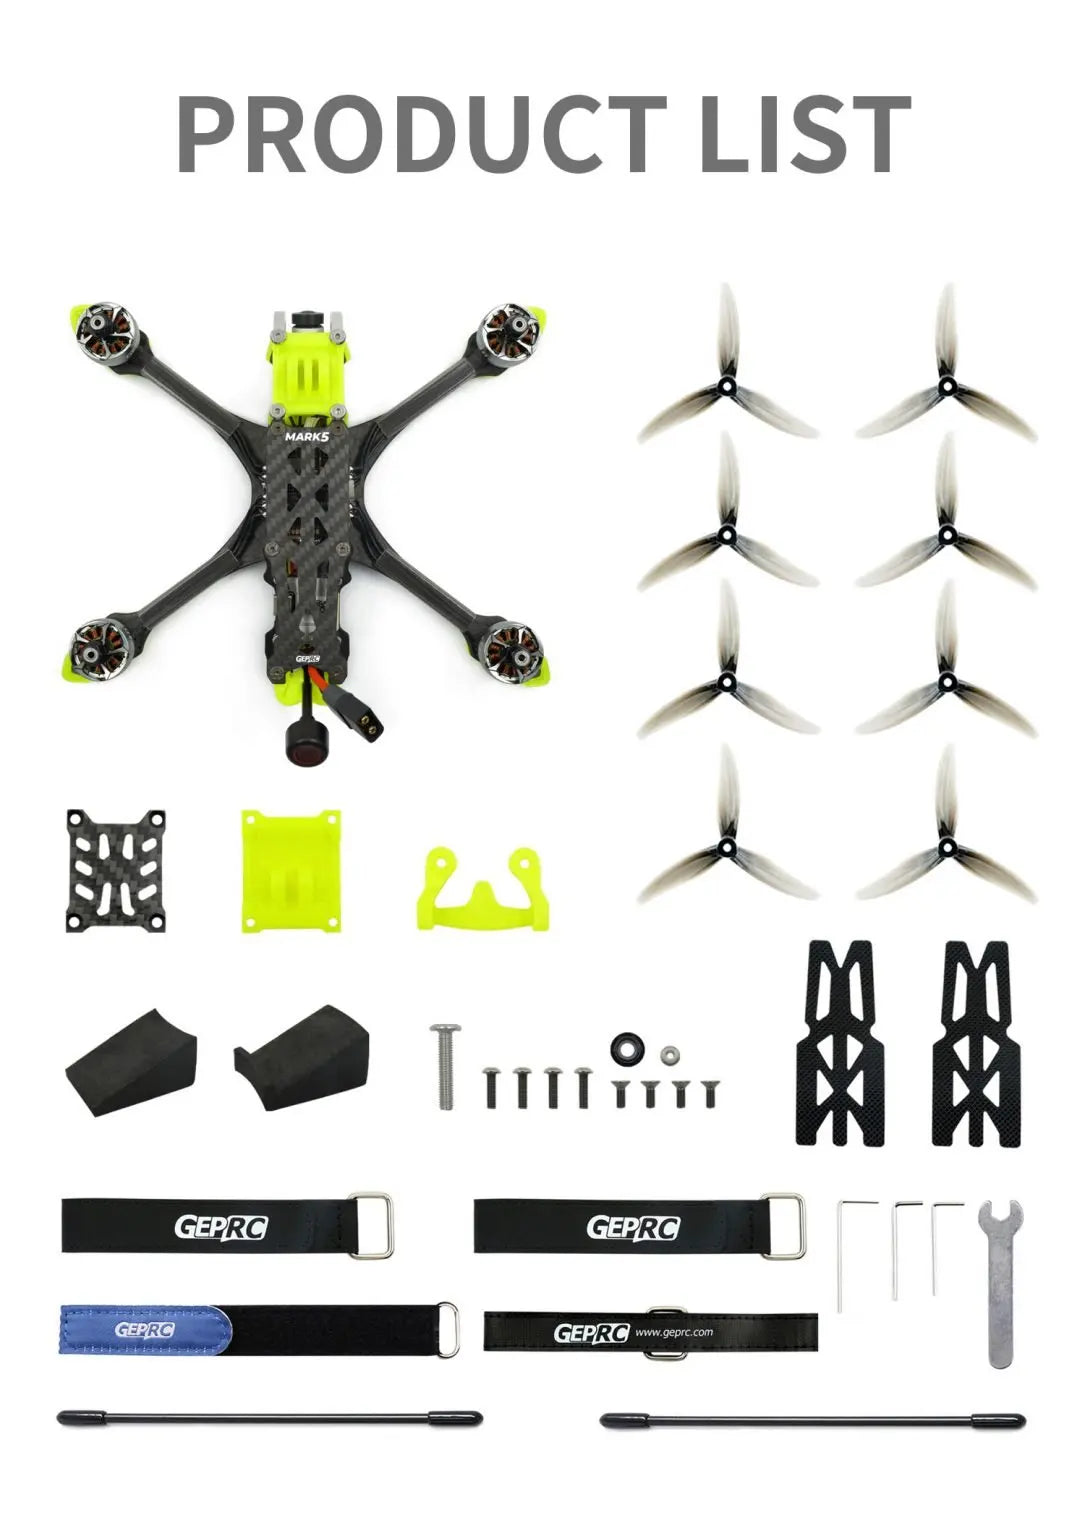 GEPRC MARK5 FPV Drone, we’ve been pursuing for lighter weight, better flying experience, and more functionality for all